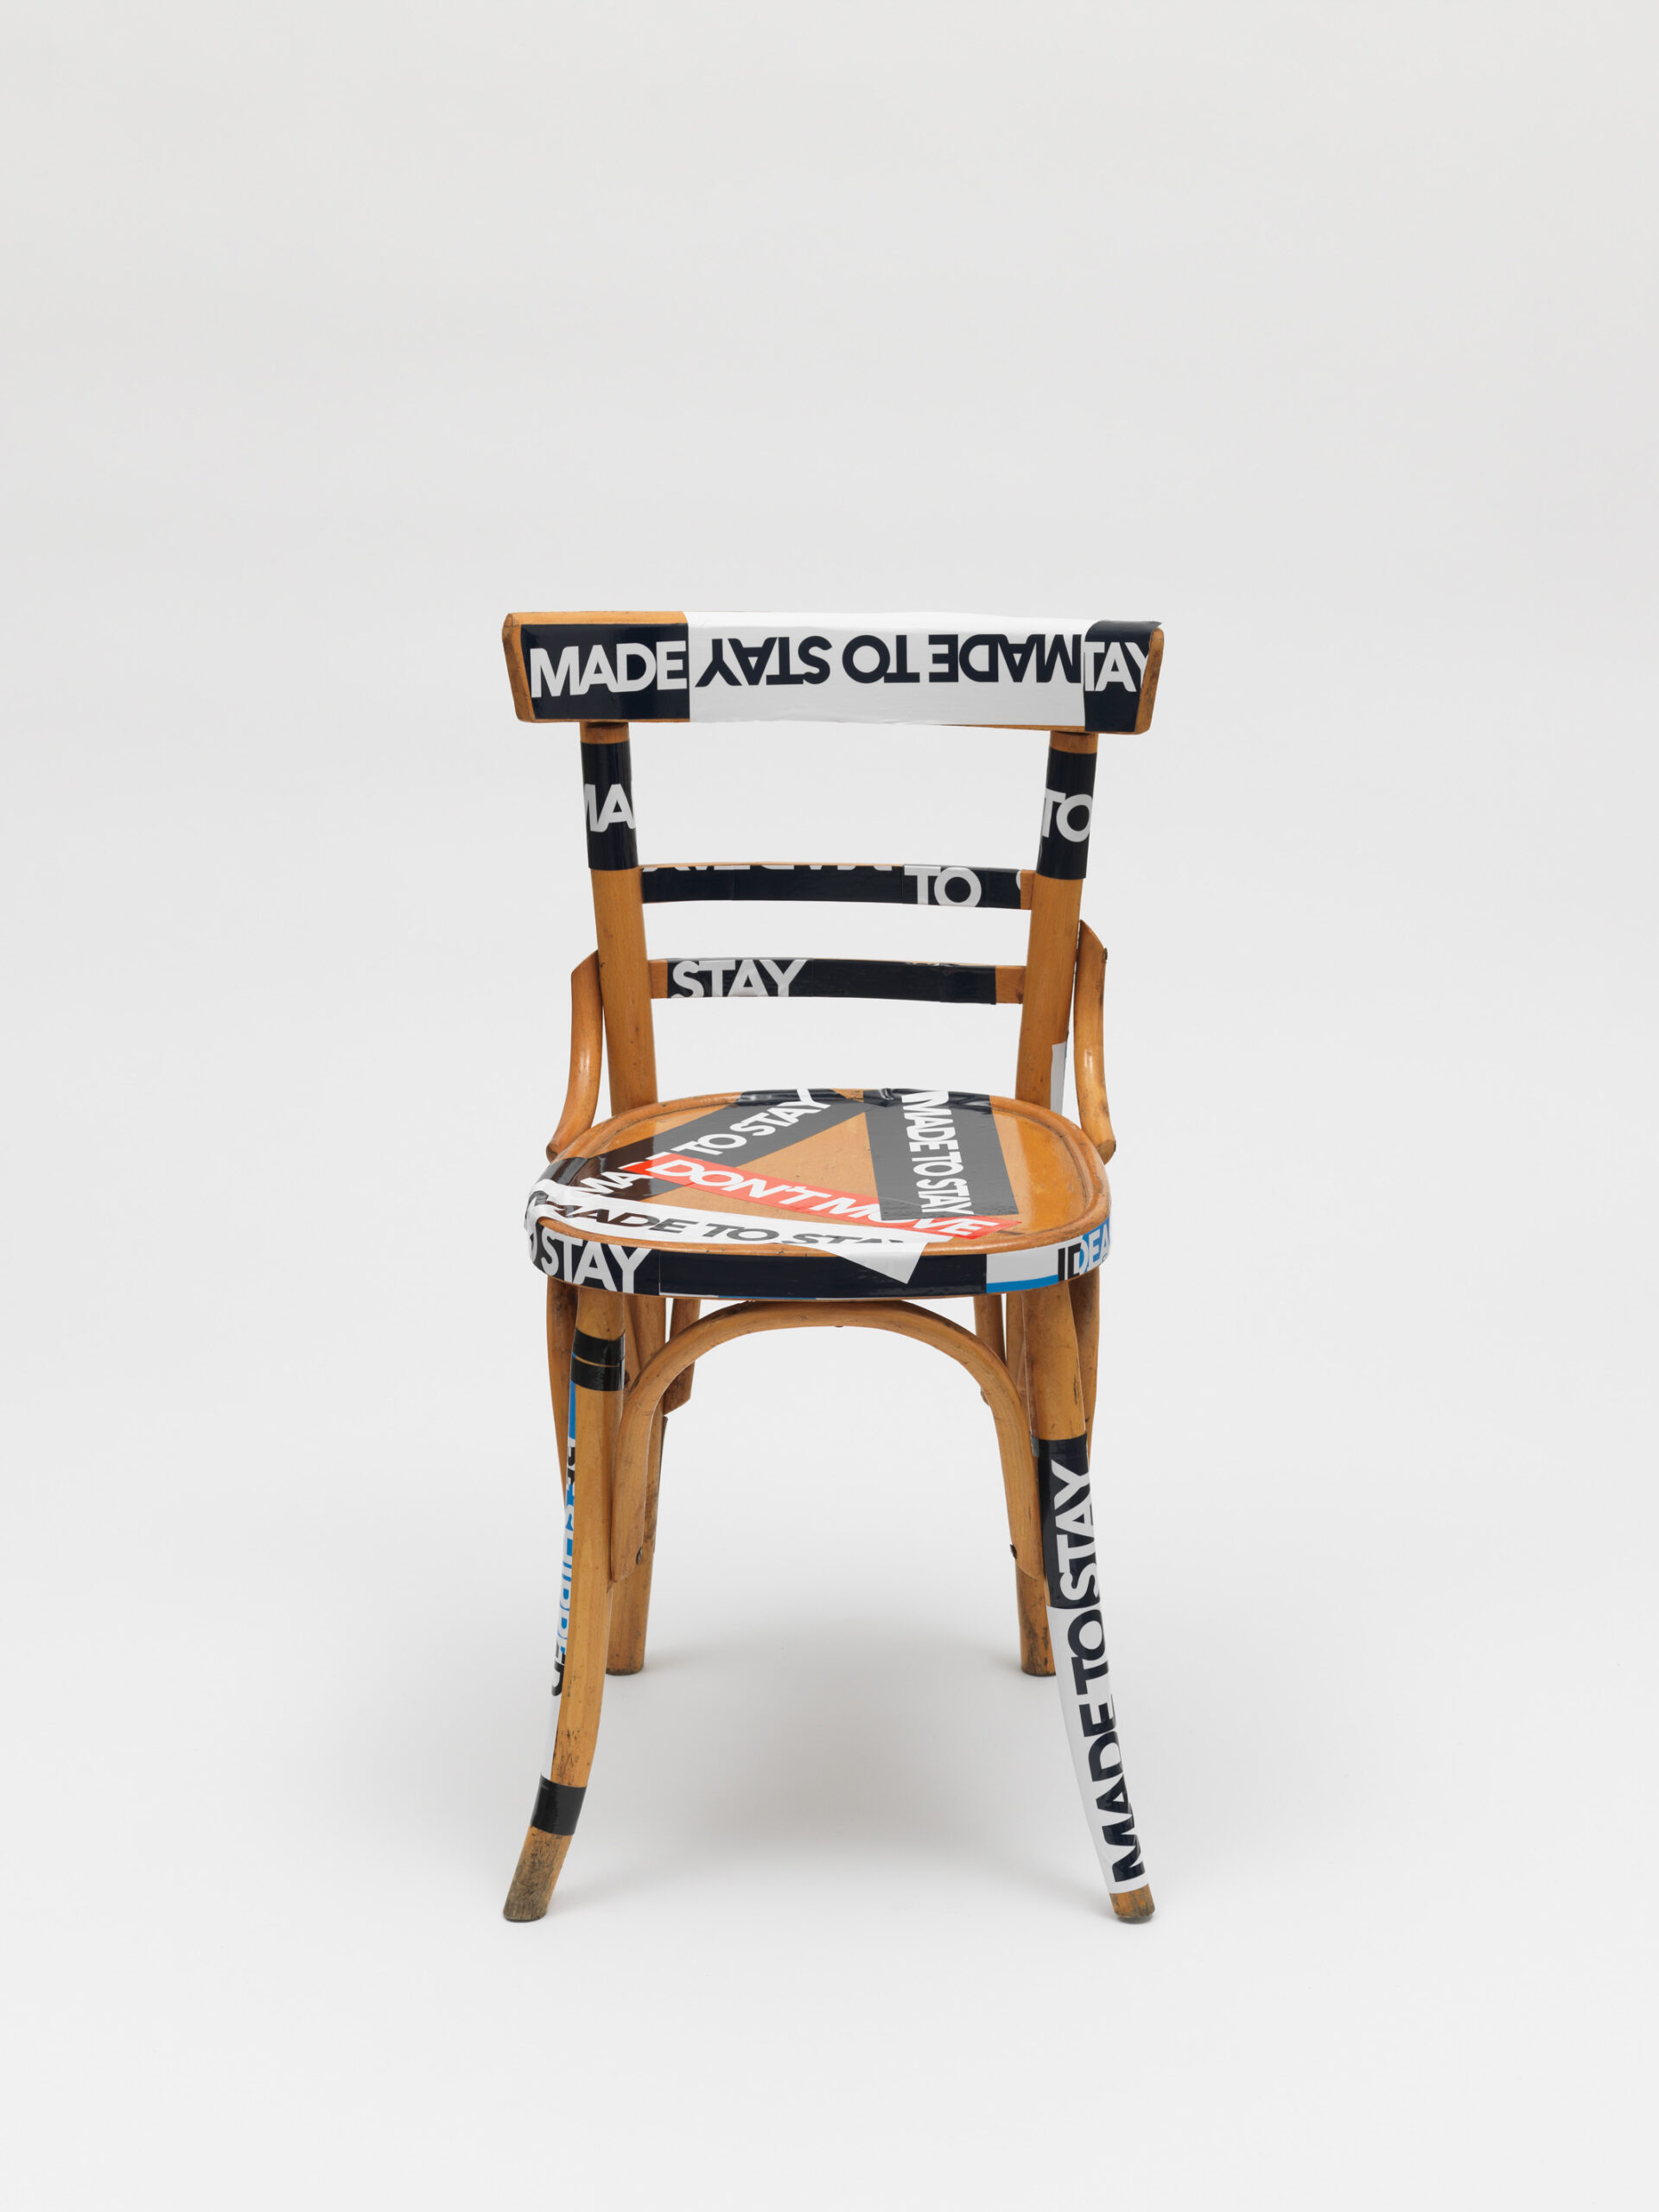 Product image: Kafeneion Chair, modified by Evi & Finn, claim stickers, 2022 Athens, 4.6 tons